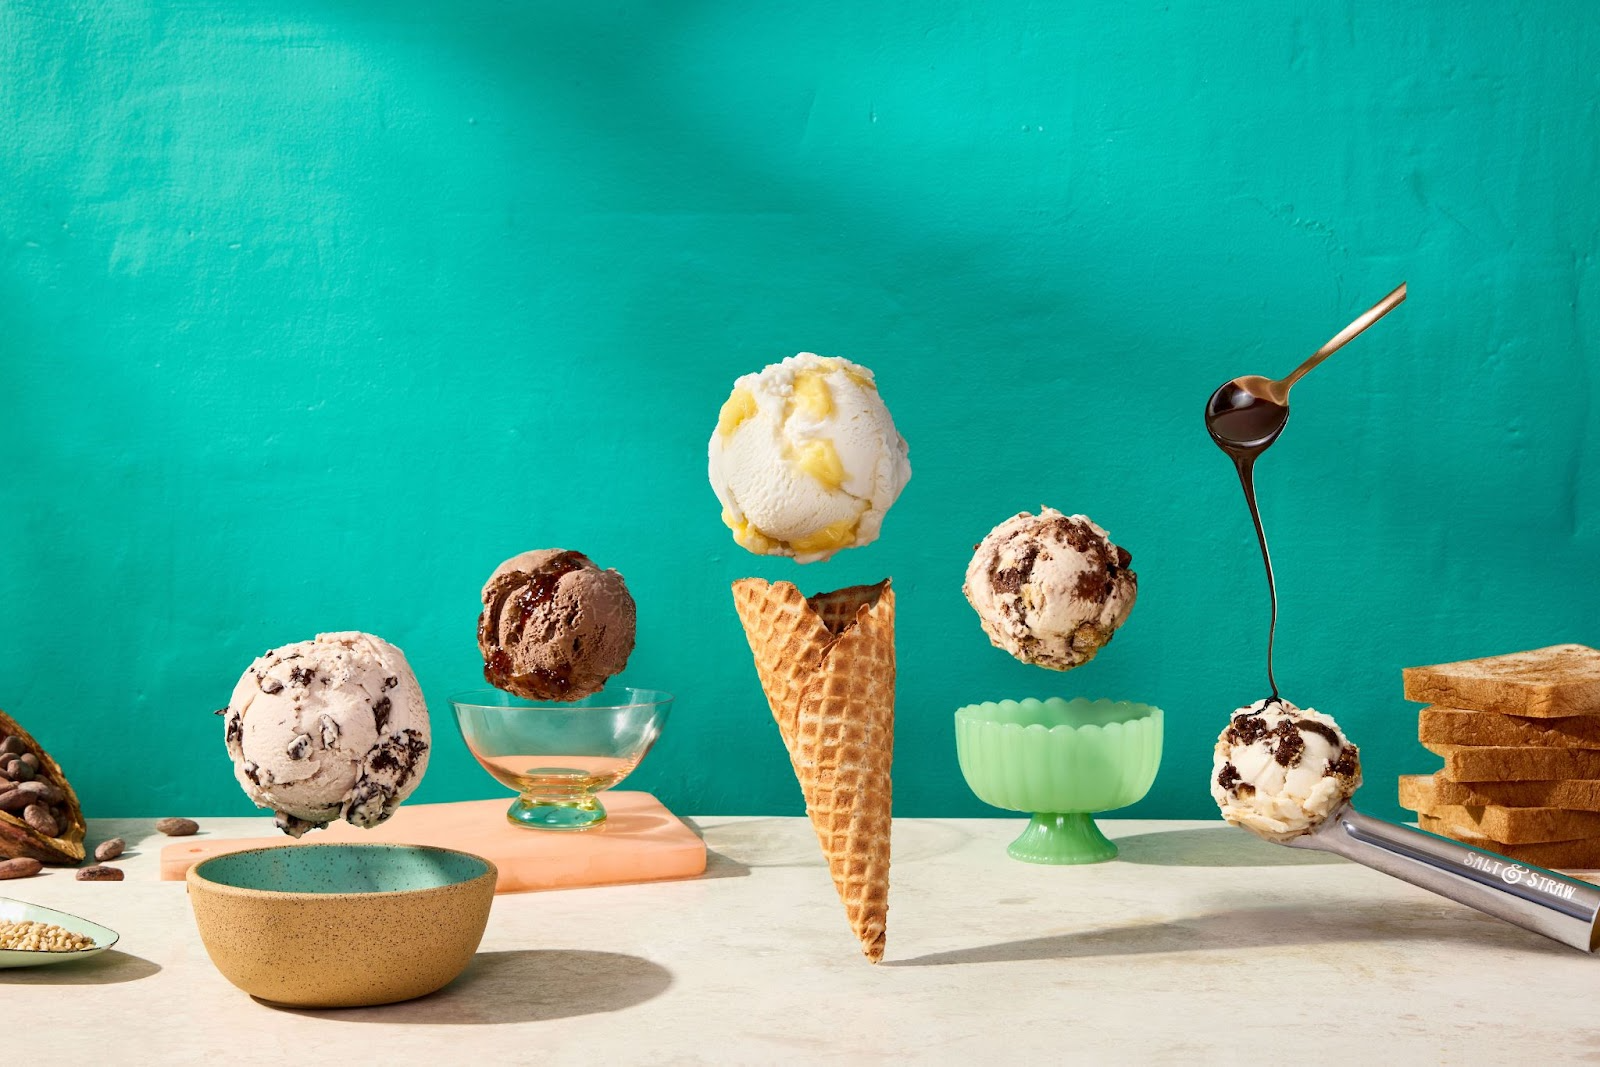 A West Coast ice cream shop co-owned by The Rock is coming to New York City